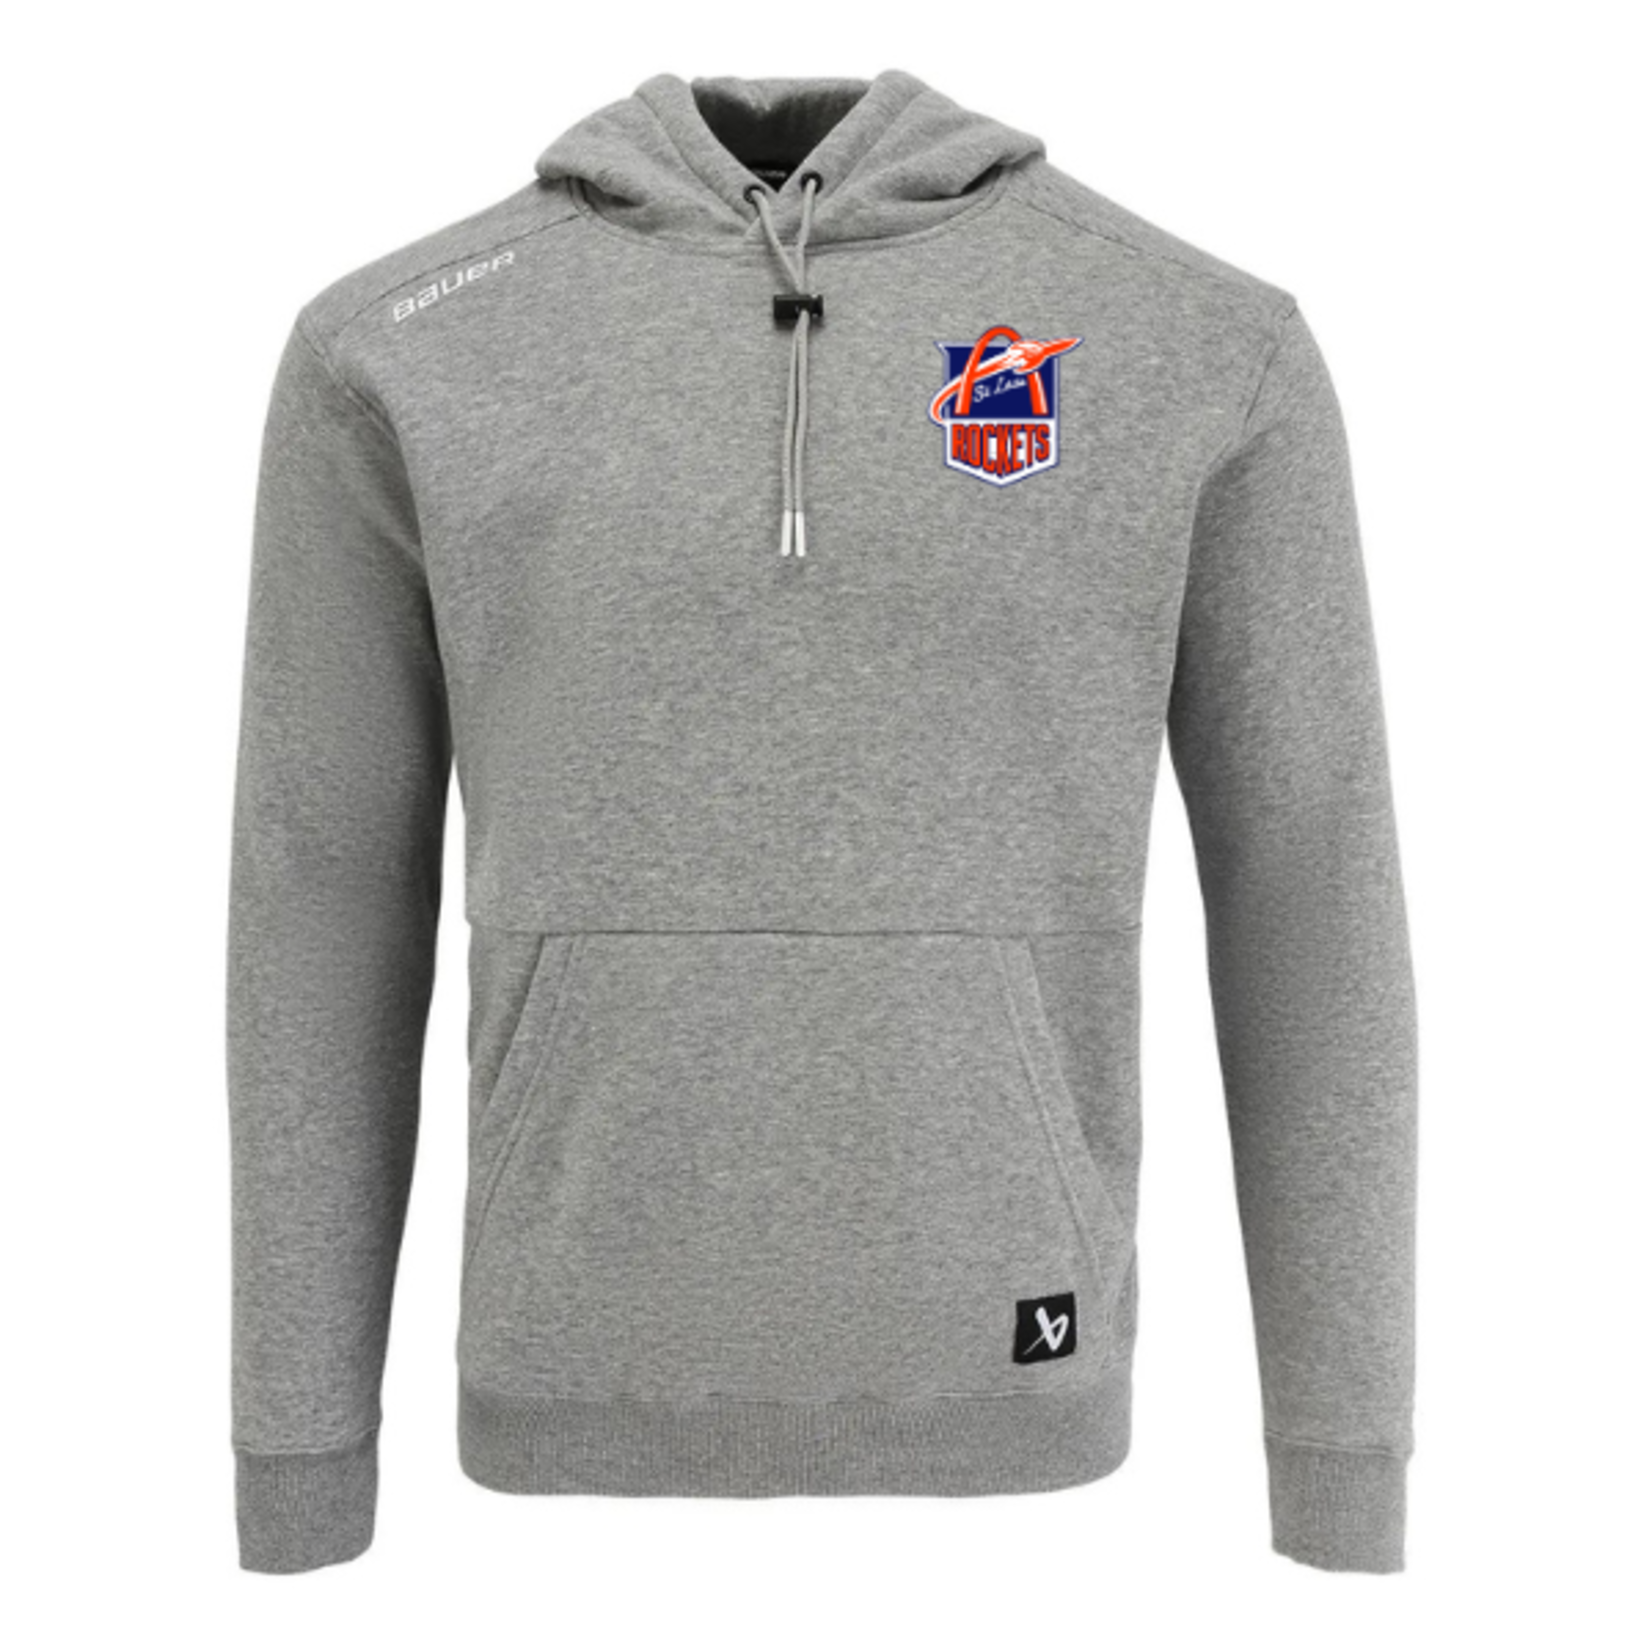 Bauer Rockets Bauer Ultimate Hoodie (YOUTH) GREY